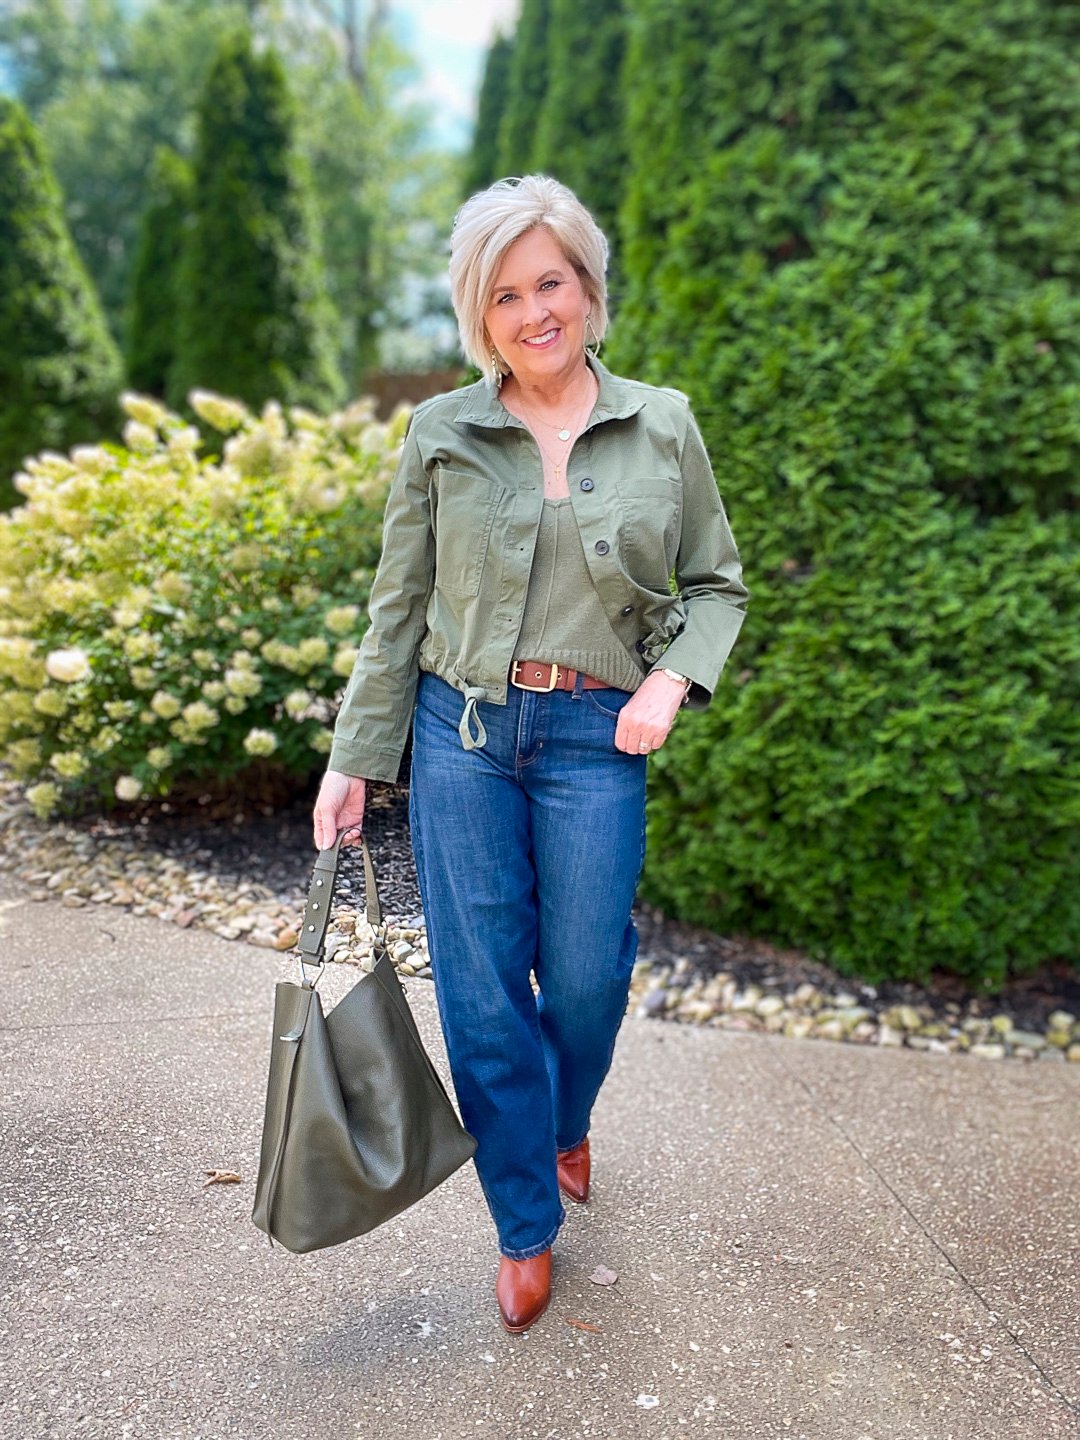 Over 40 Fashion Blogger, Tania Stephens is wearing an olive green jacket and sweater tank from Banana Republic 9